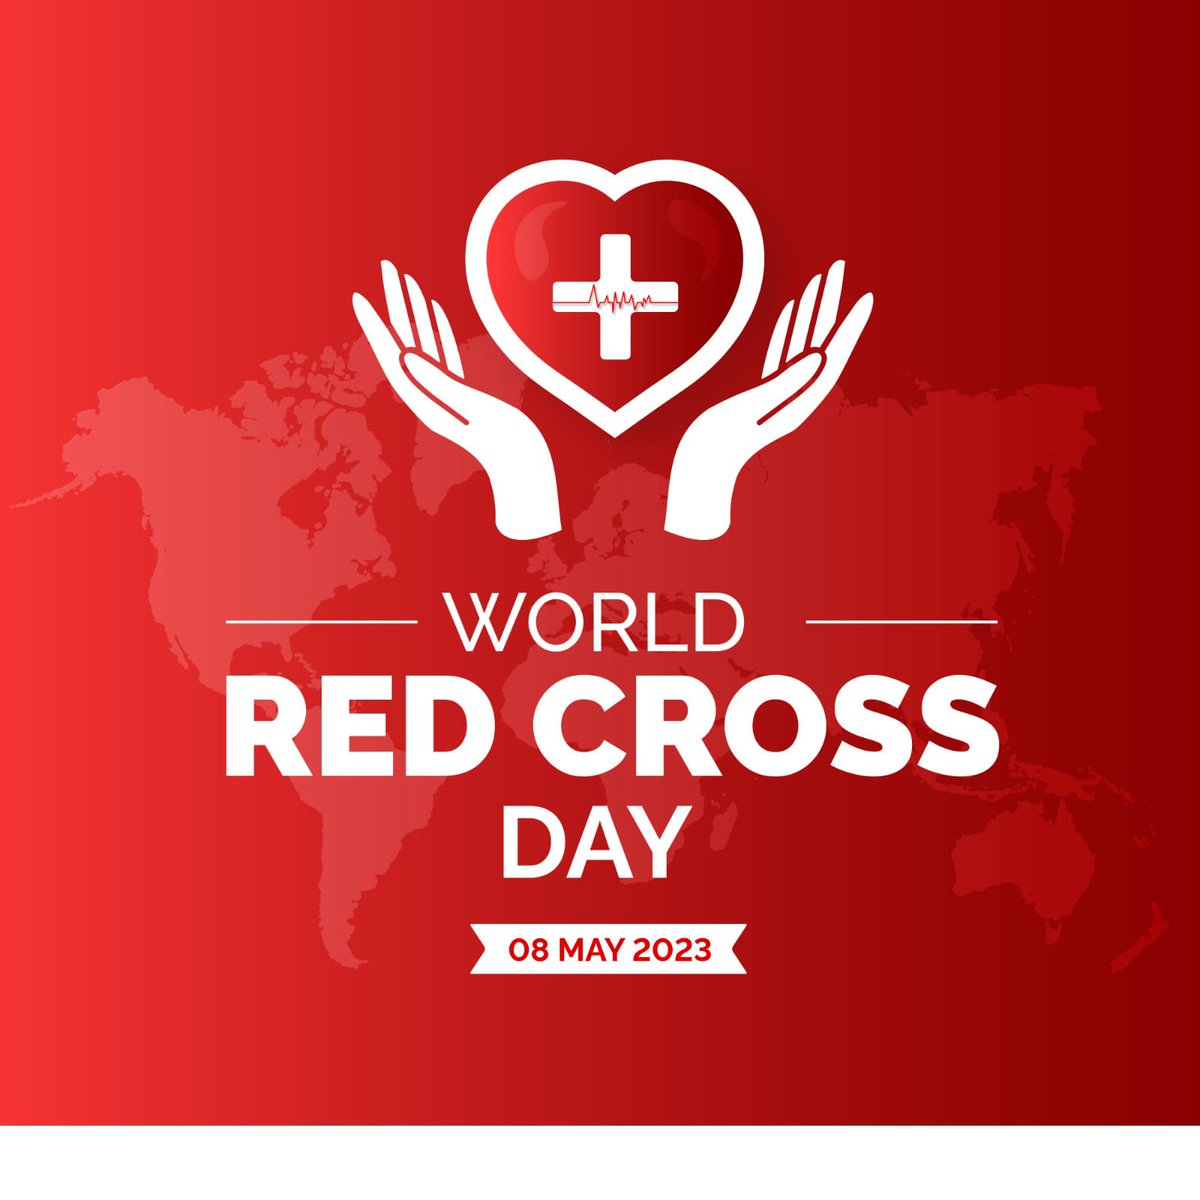 Celebrate #WorldRedCrossDay 2024 with the theme, 'Giving Joyously, Receiving Joyfully.' Every act of kindness we offer, every helping hand we extend, uplifts our shared humanity.